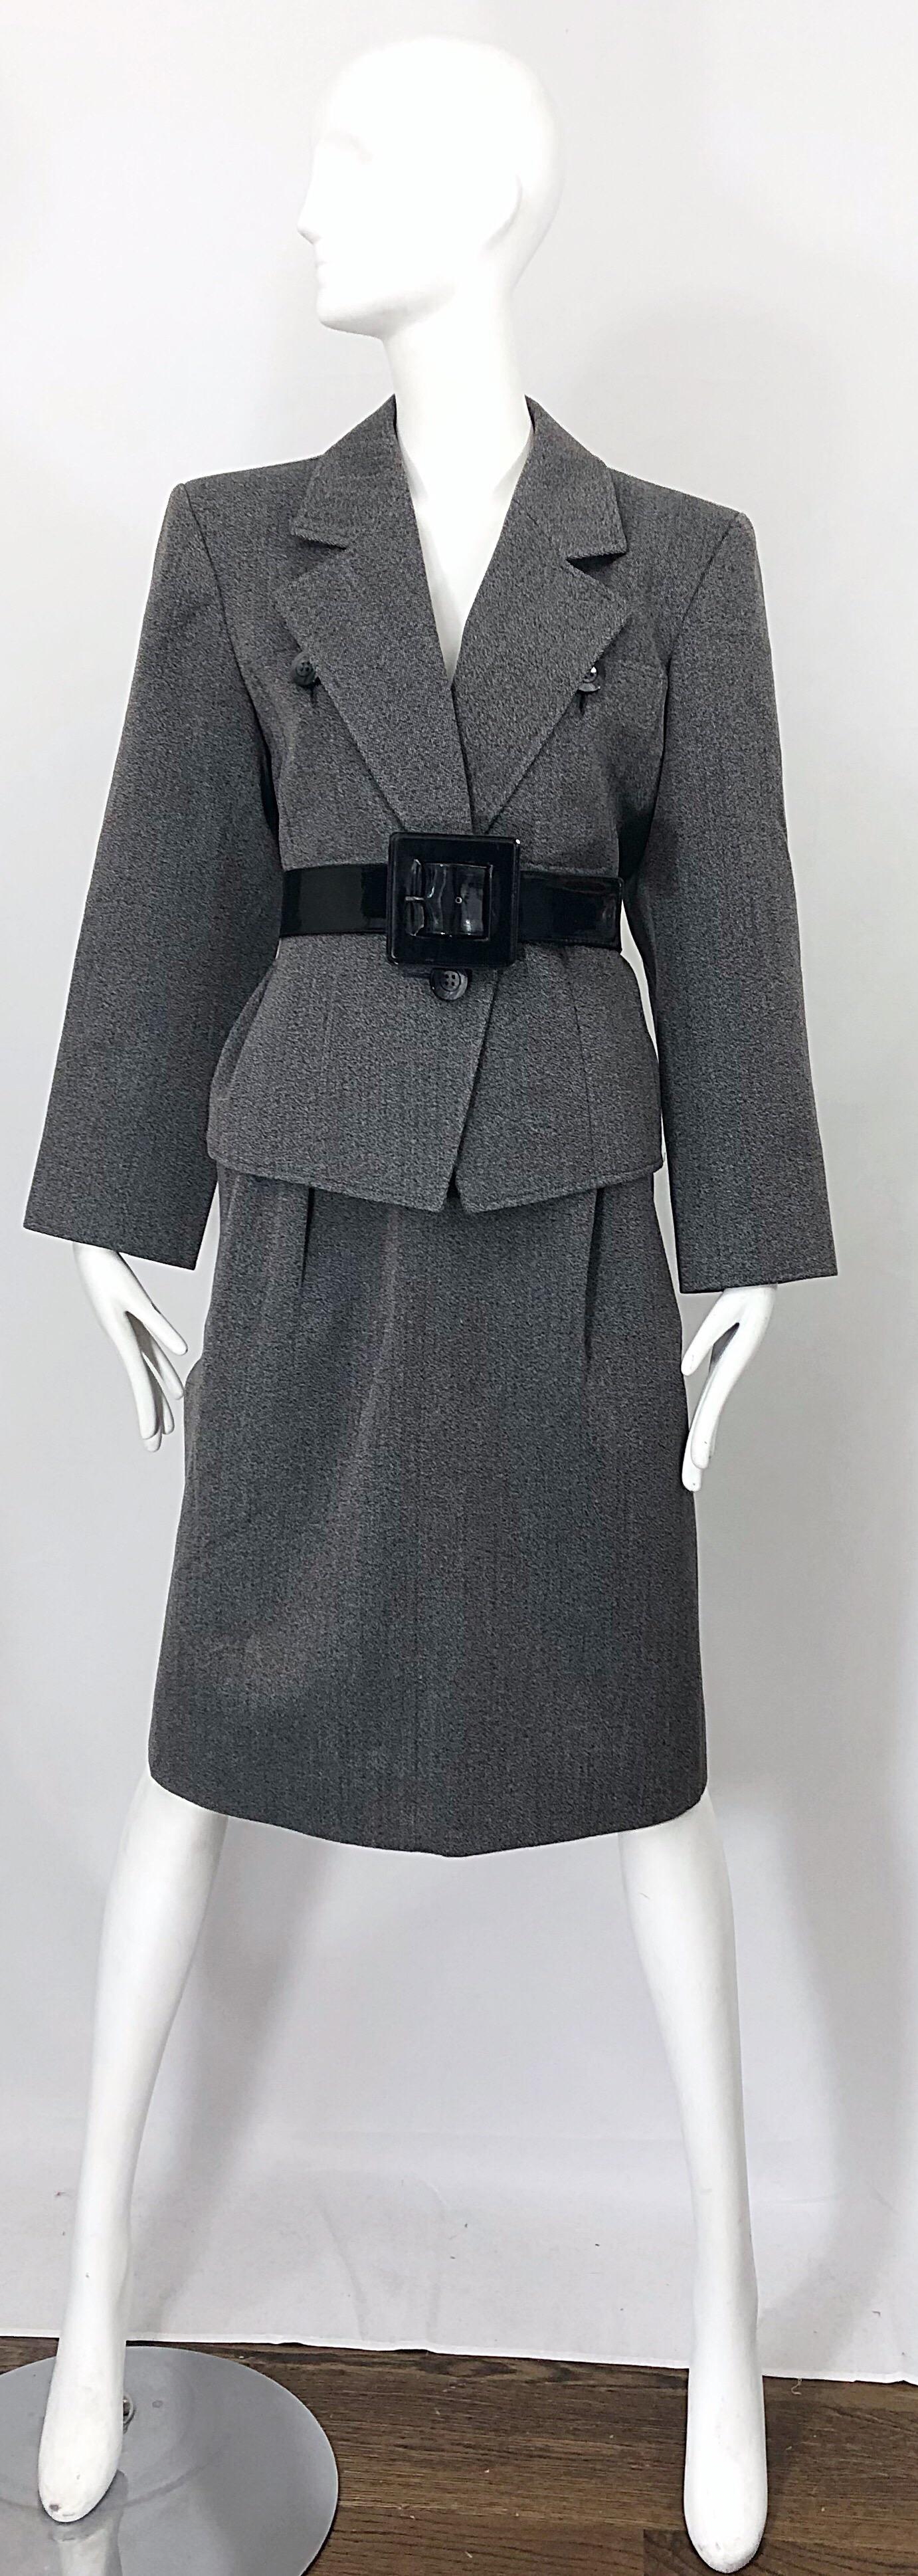 belted wool skirt suits